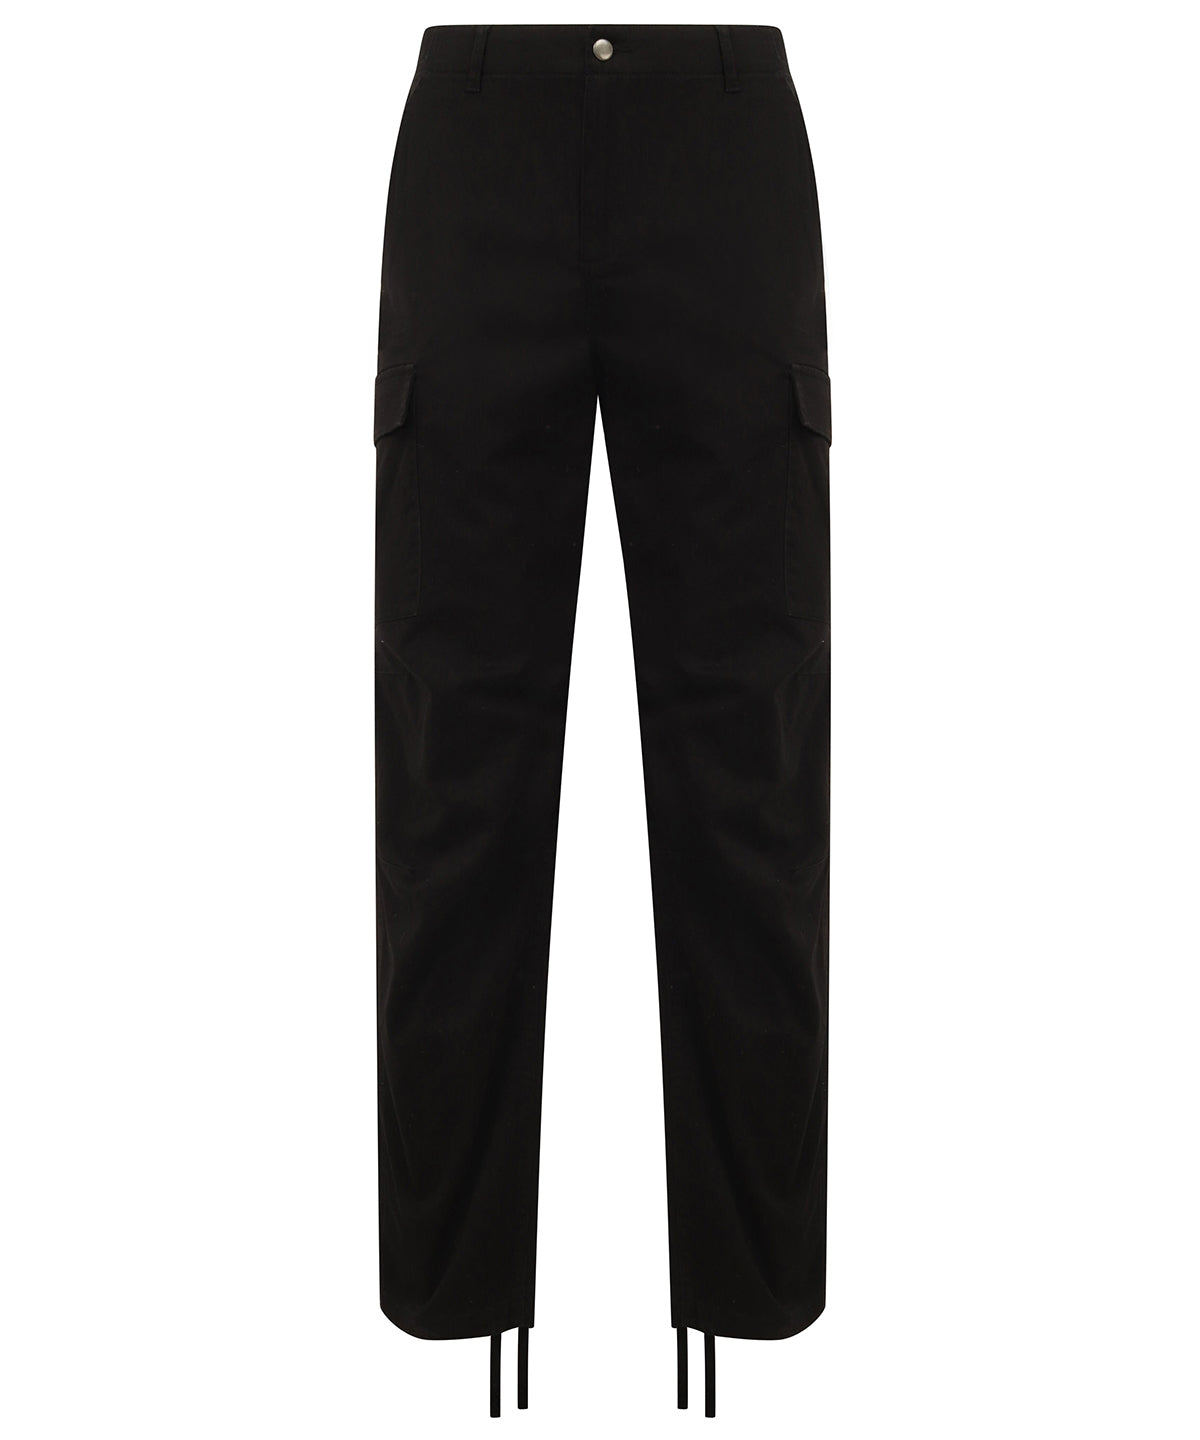 Personalised Trousers - Black Front Row Stretch cargo trousers